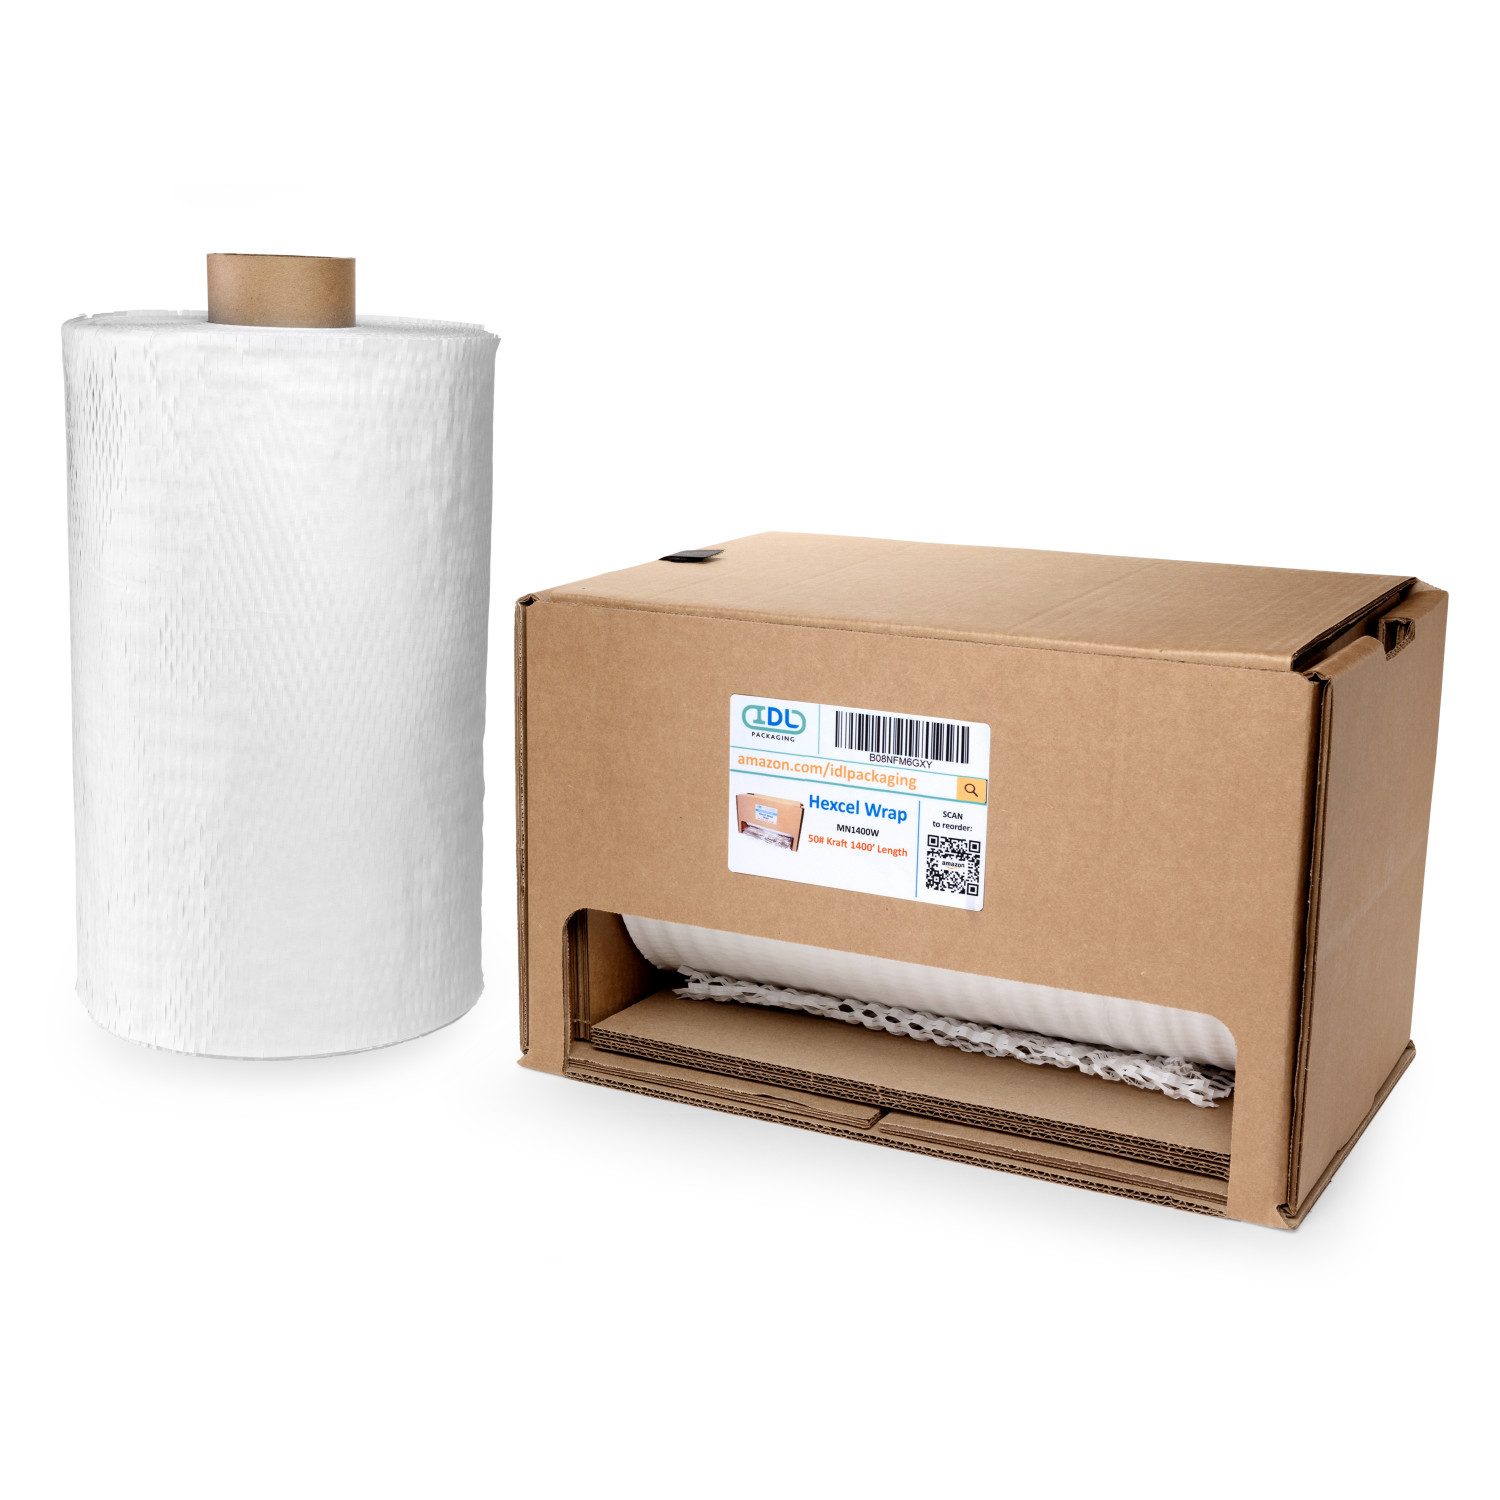 IDL Packaging Honeycomb Packing Paper Set, White - 15 x 1400' HexcelWrap  Kraft Paper Roll in Self-Dispensed Box + 1 Refill Roll - Protective